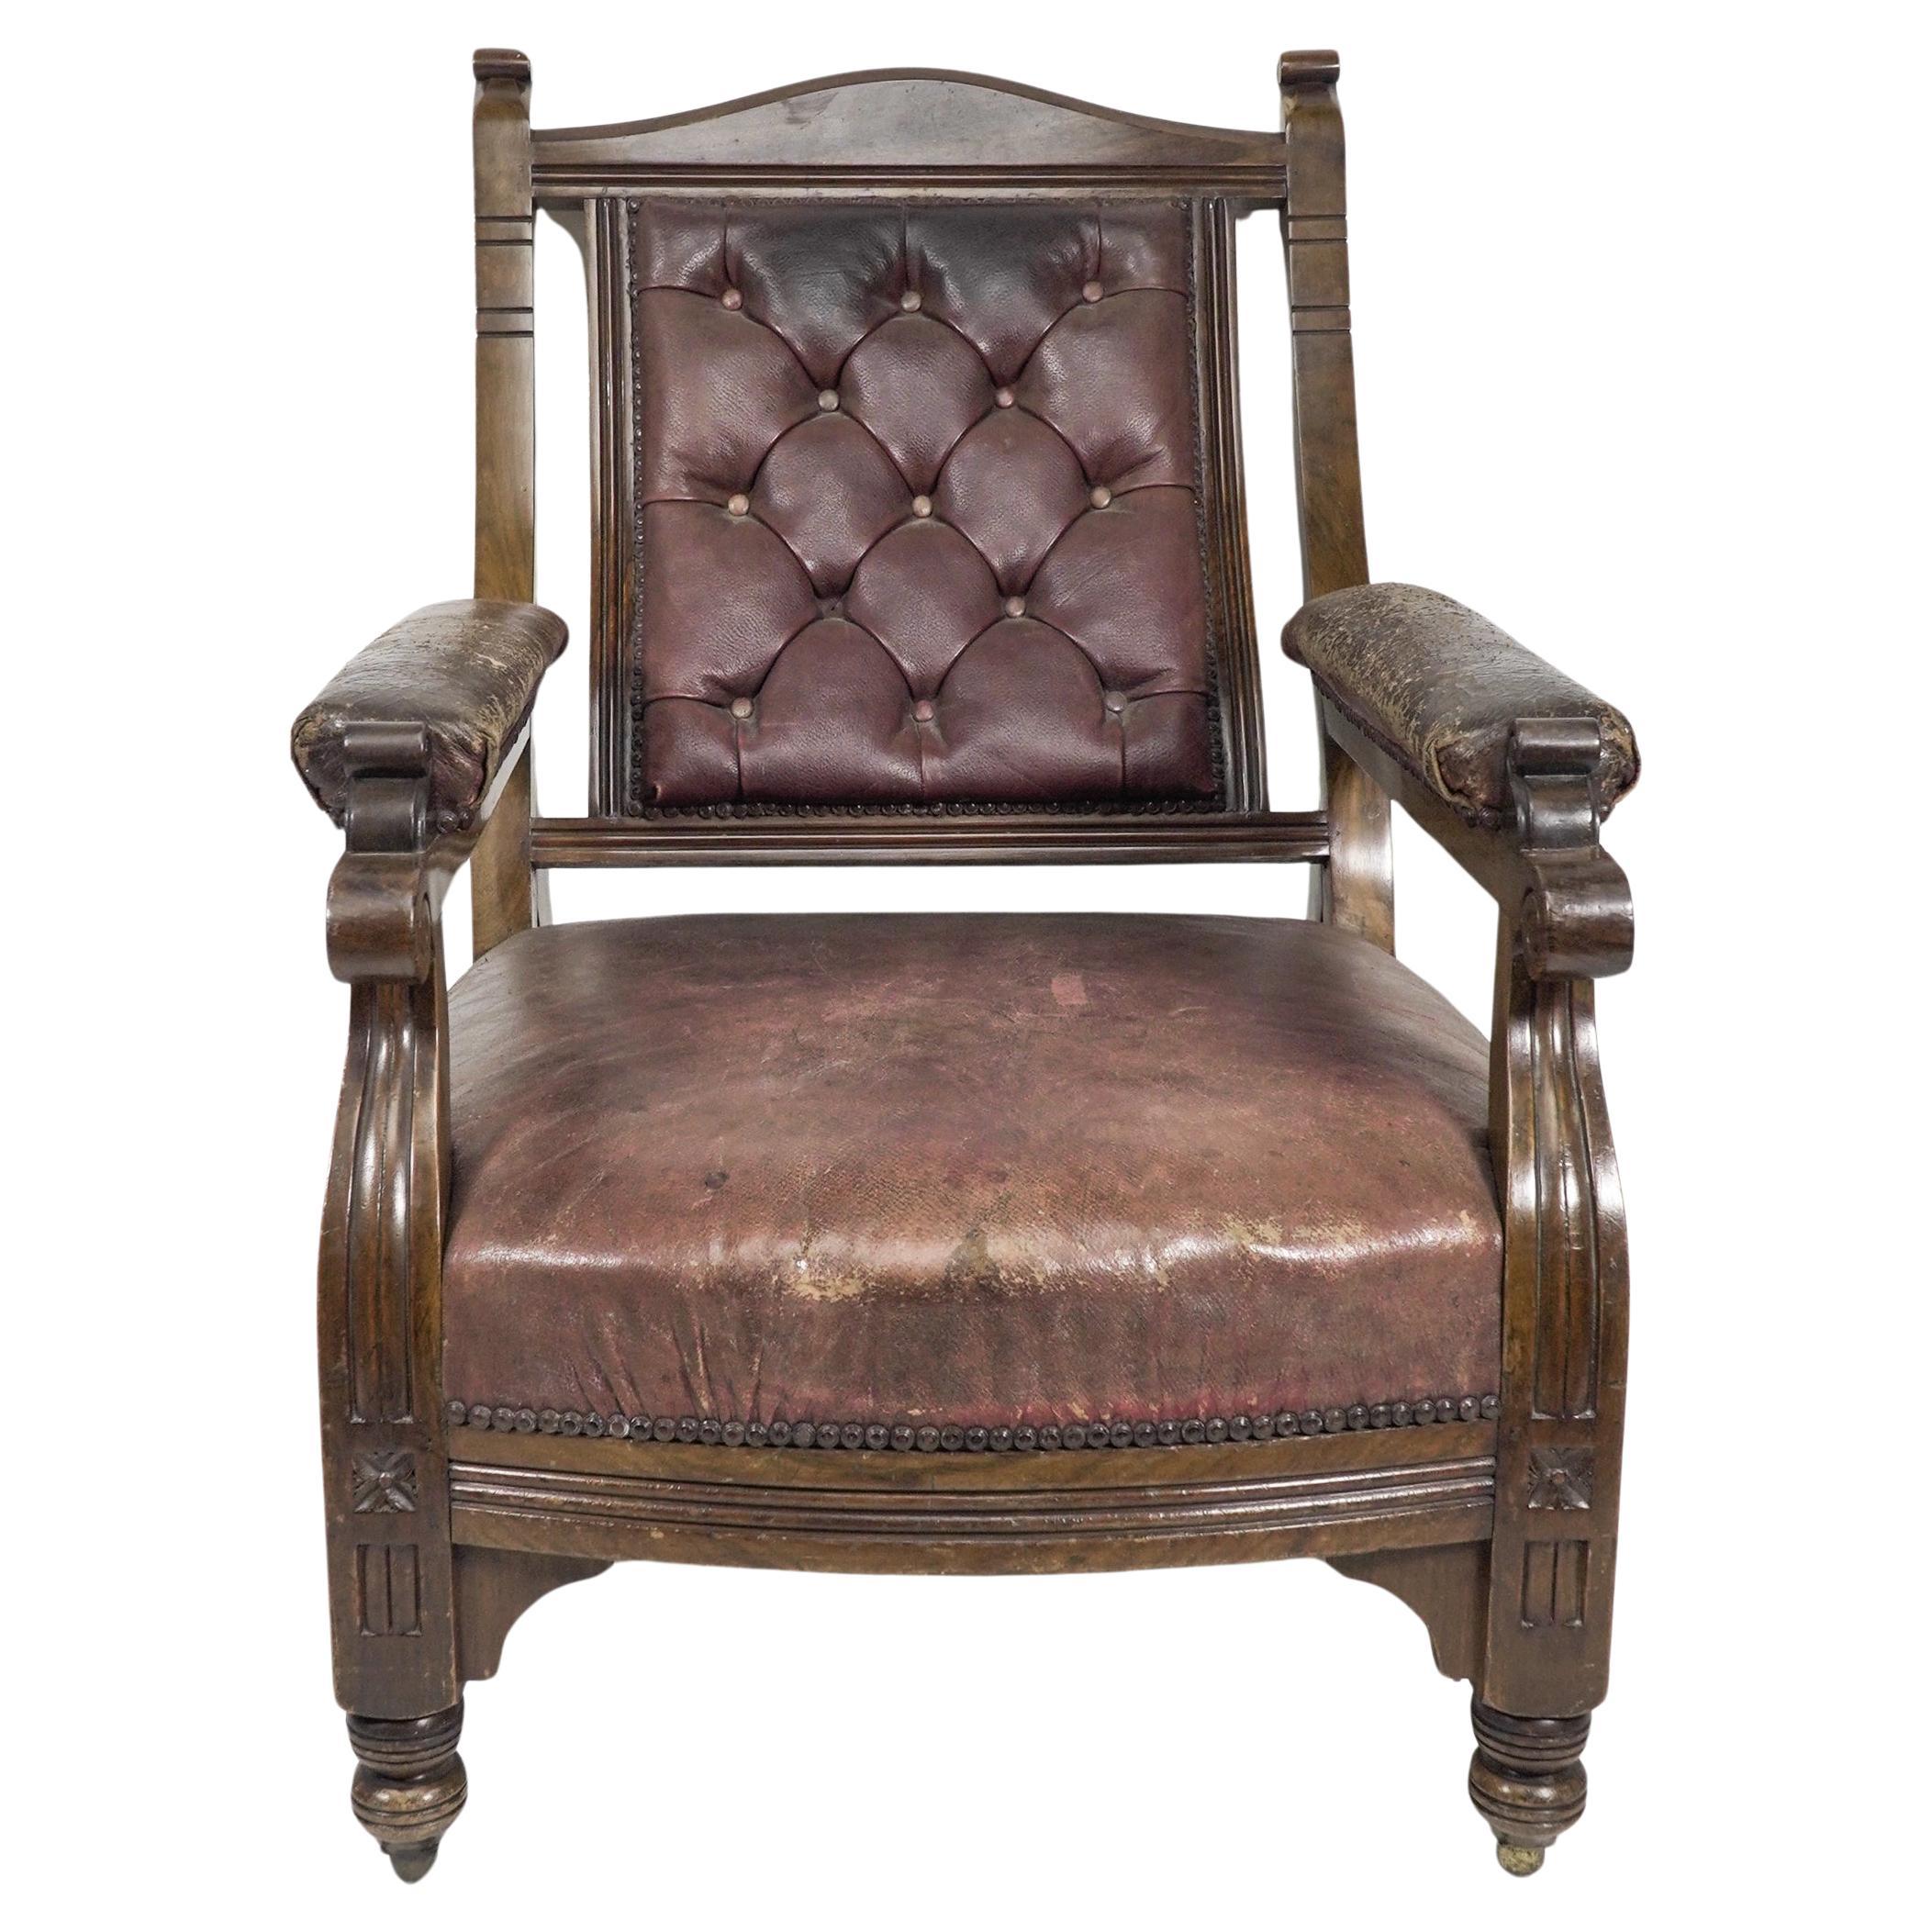 An Aesthetic Movement Walnut Library armchair with a curvaceous back and nicely worn button back leather upholstery. The arms with double curves to the end of the armrests and florets carved to the front legs and a strong architectural angular